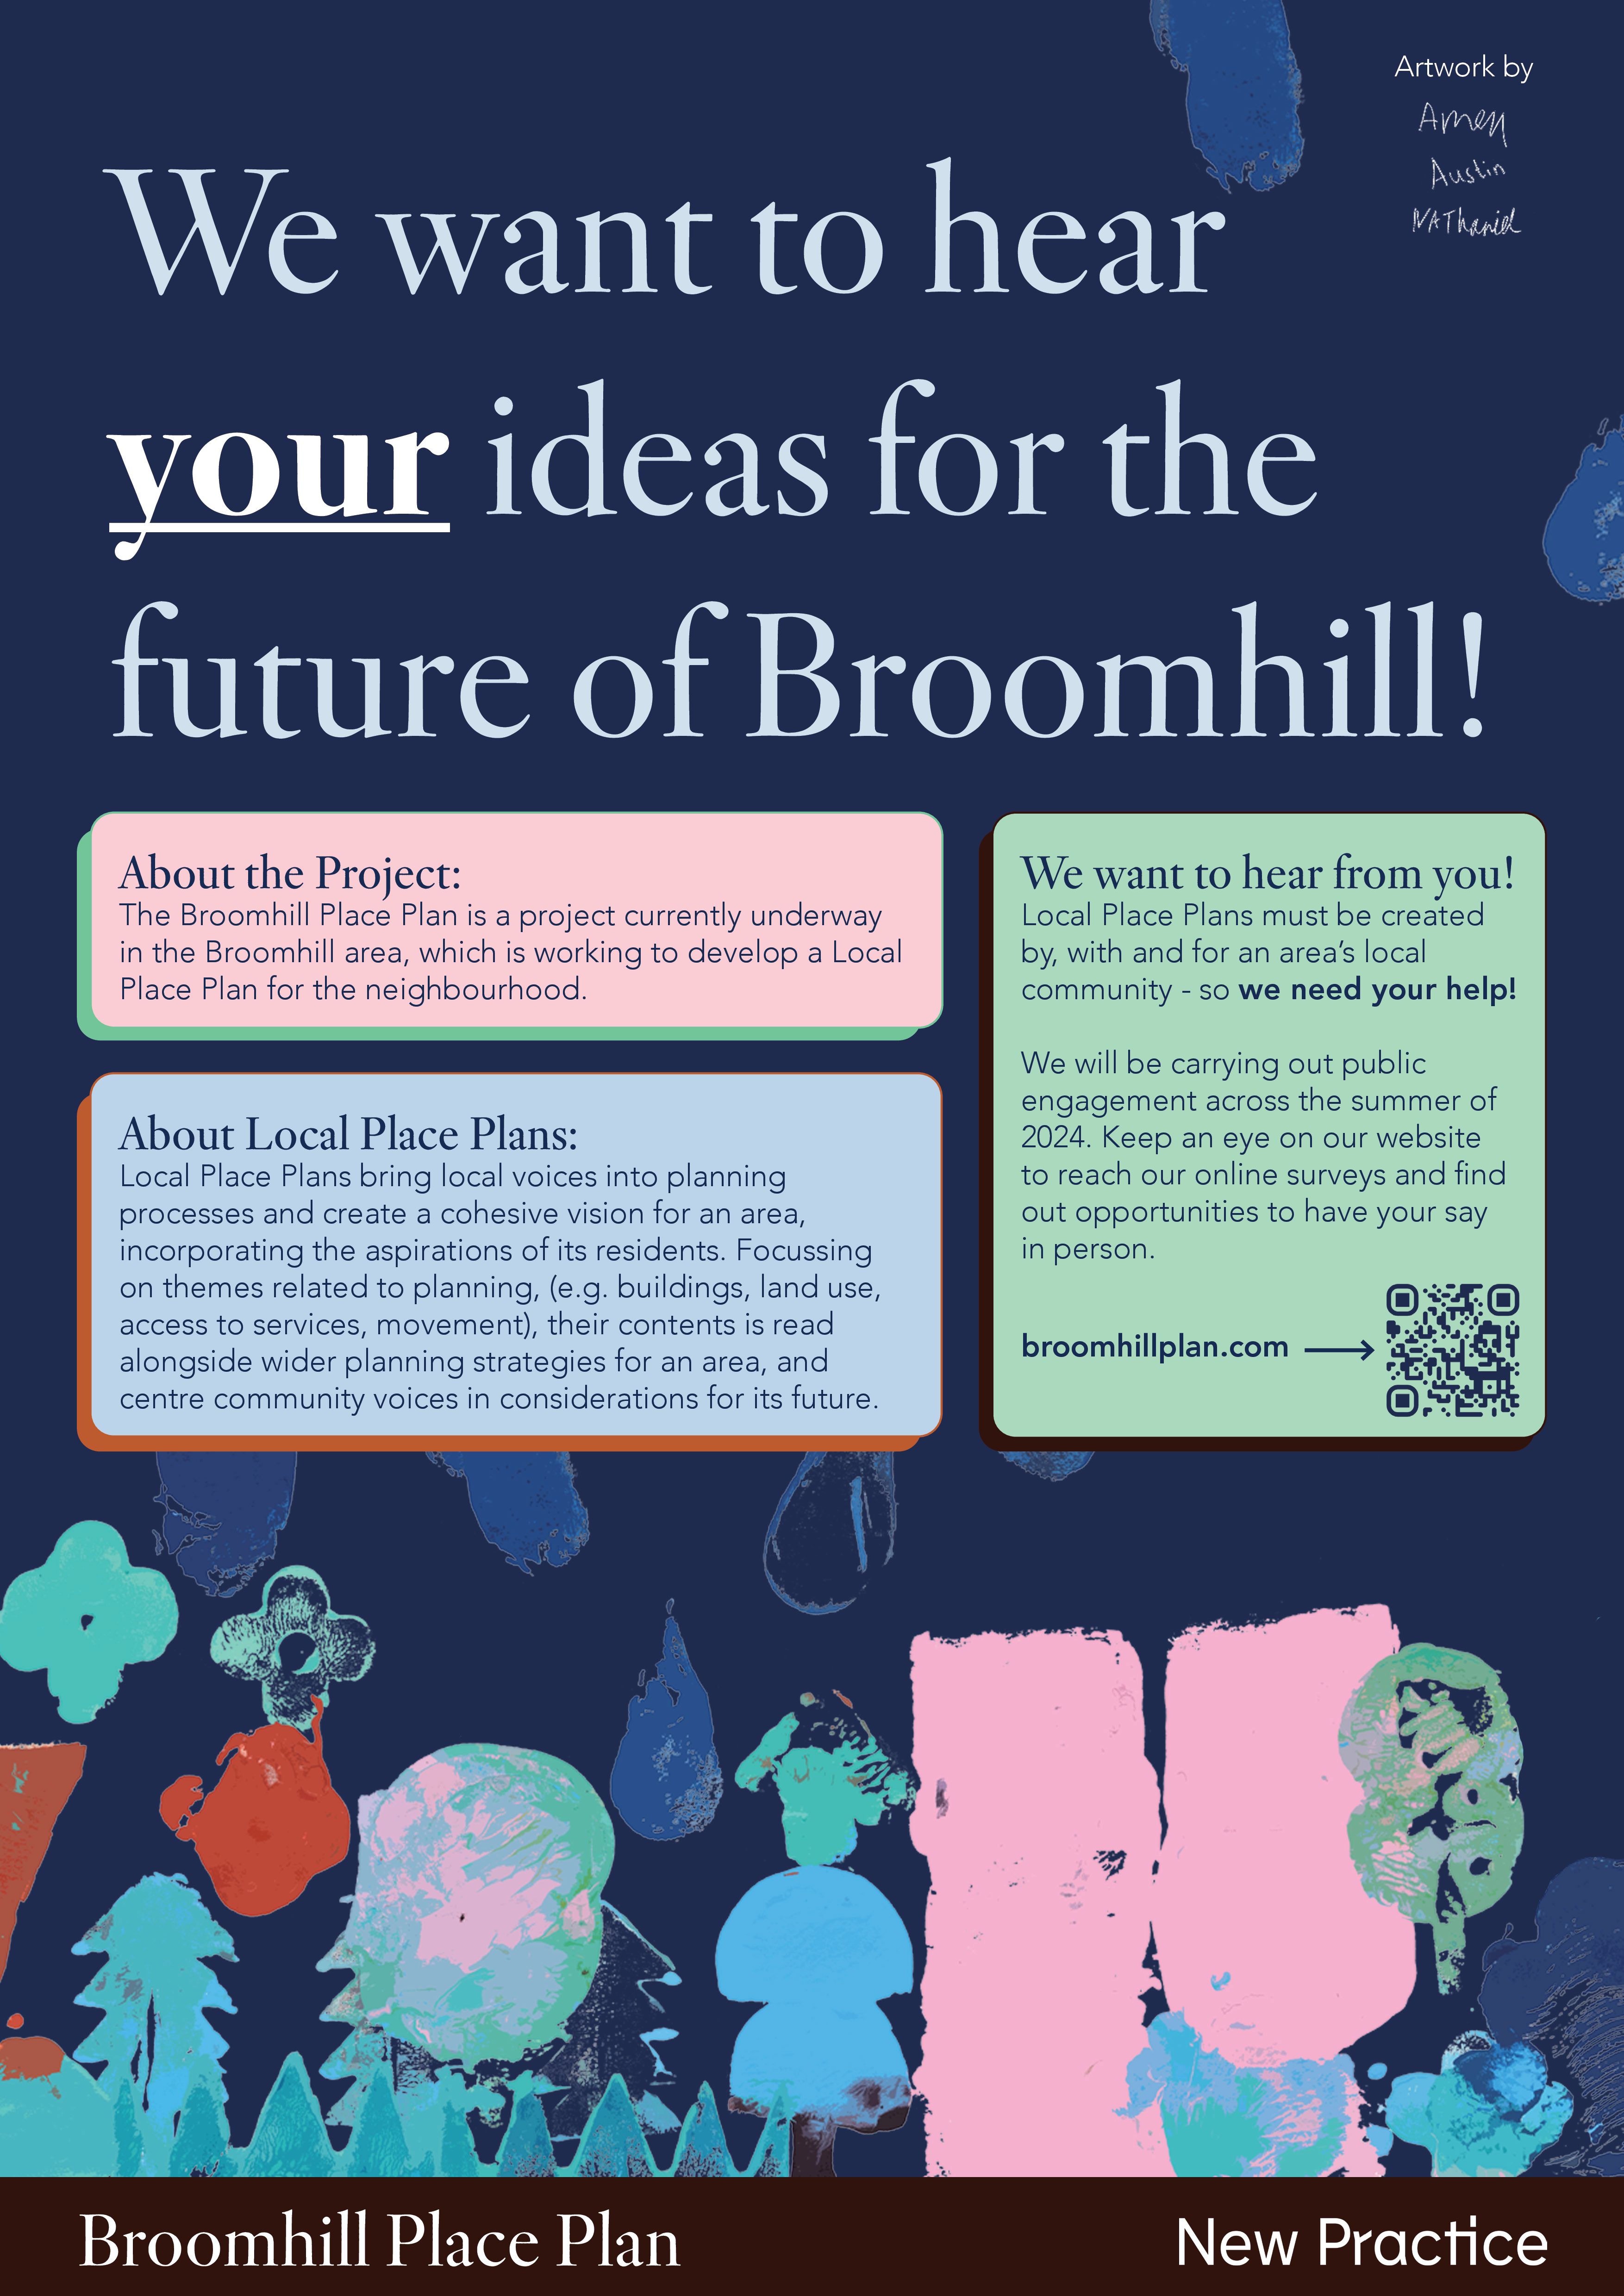 We need your input for Broomhill's future! Share your ideas in our first public engagement round for the Local Place Plan. Visit www.broomhillplan.com for details and our online survey.